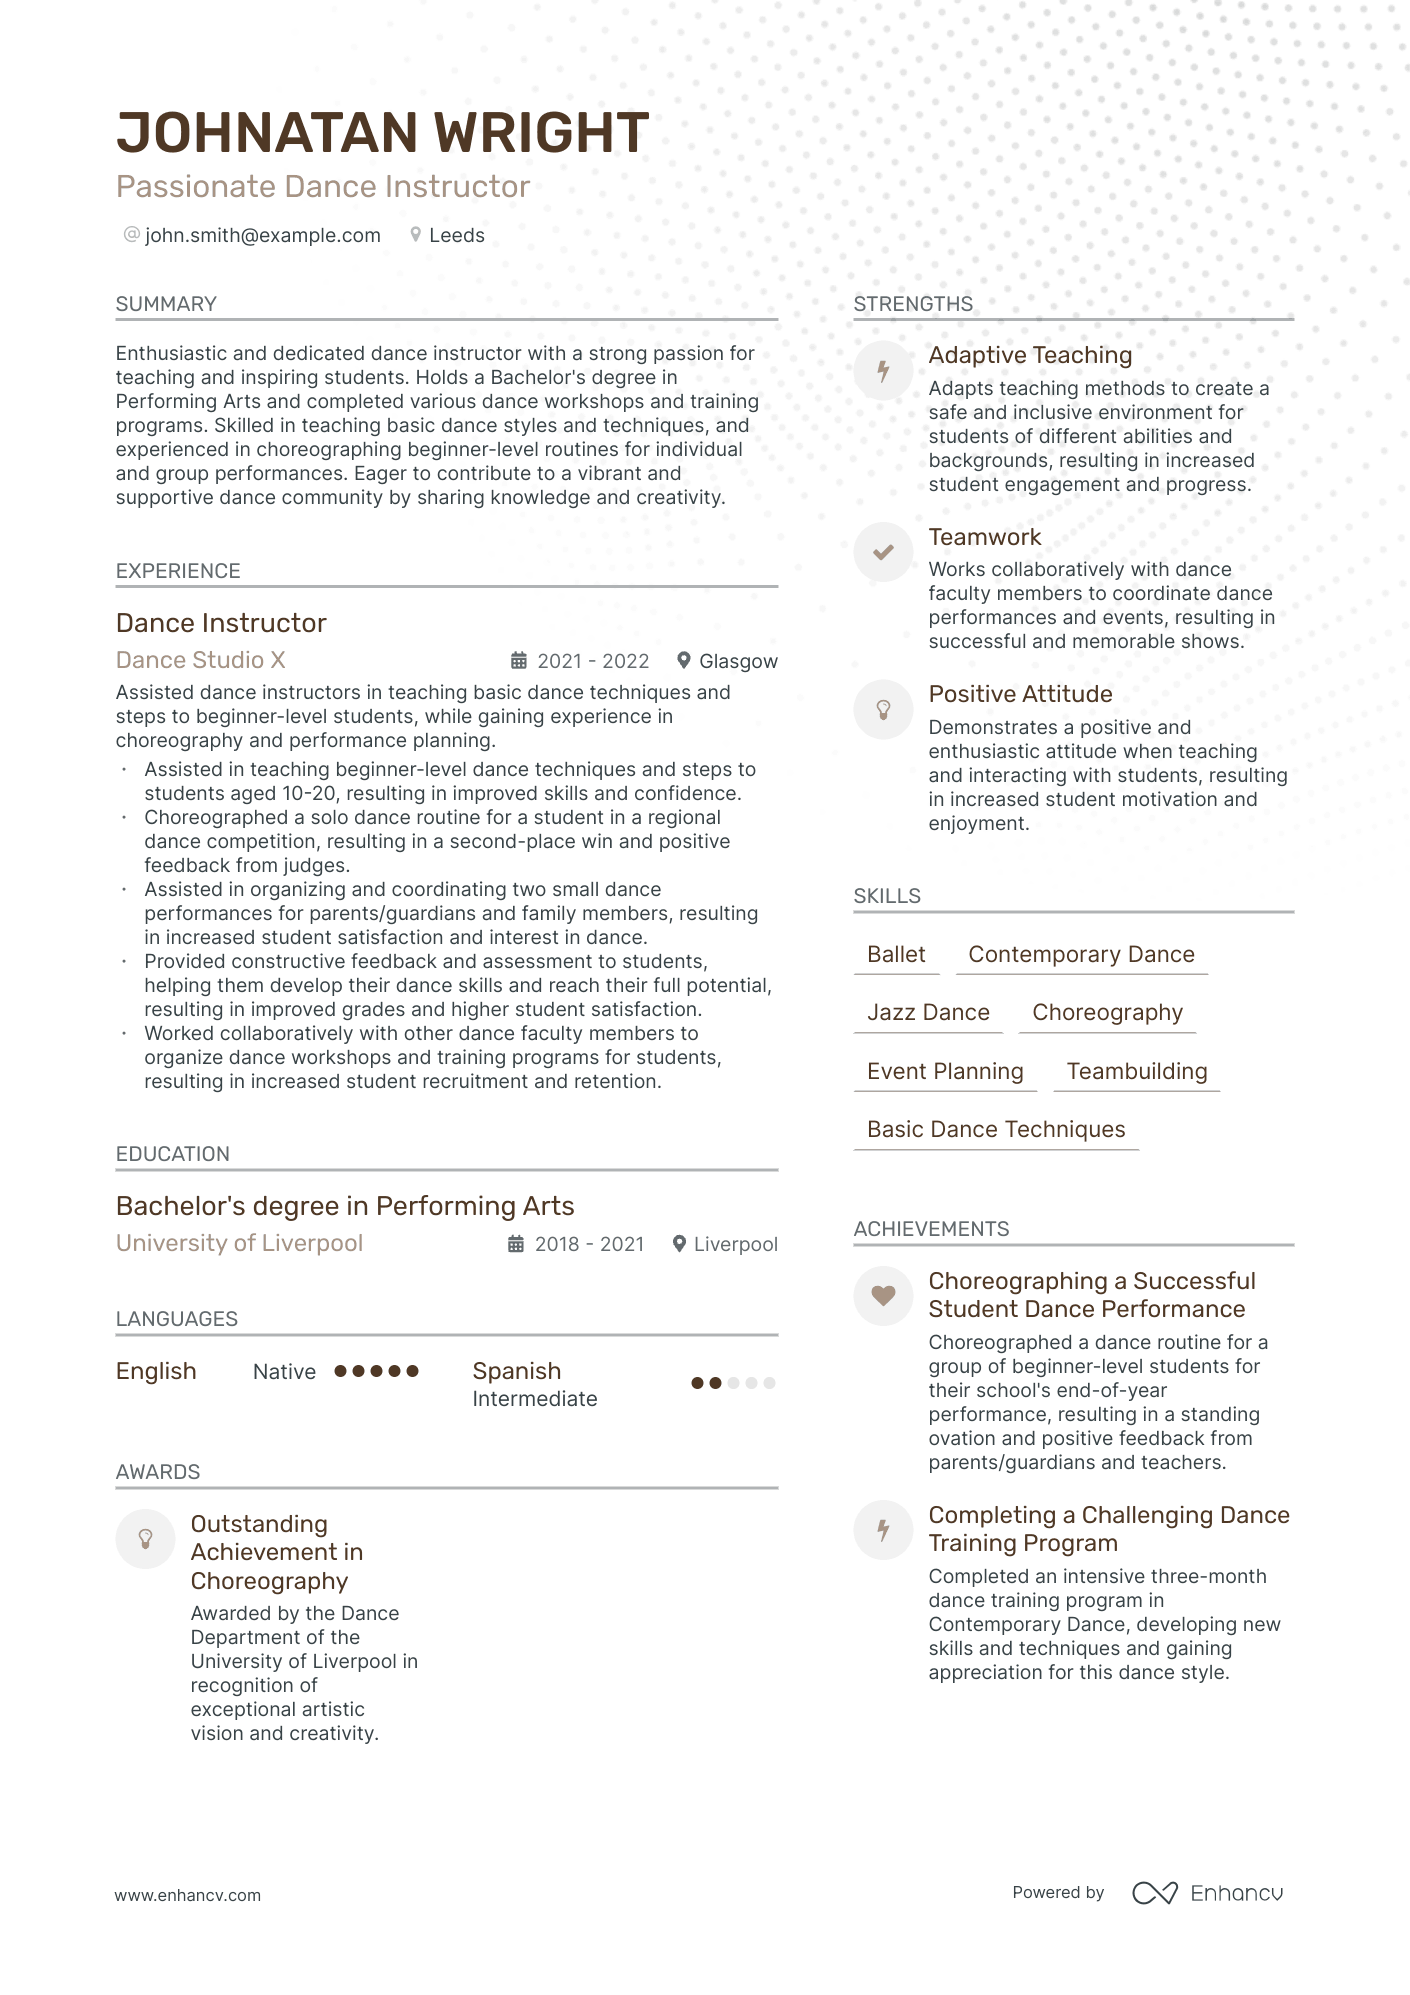 Passionate Dance Instructor CV example